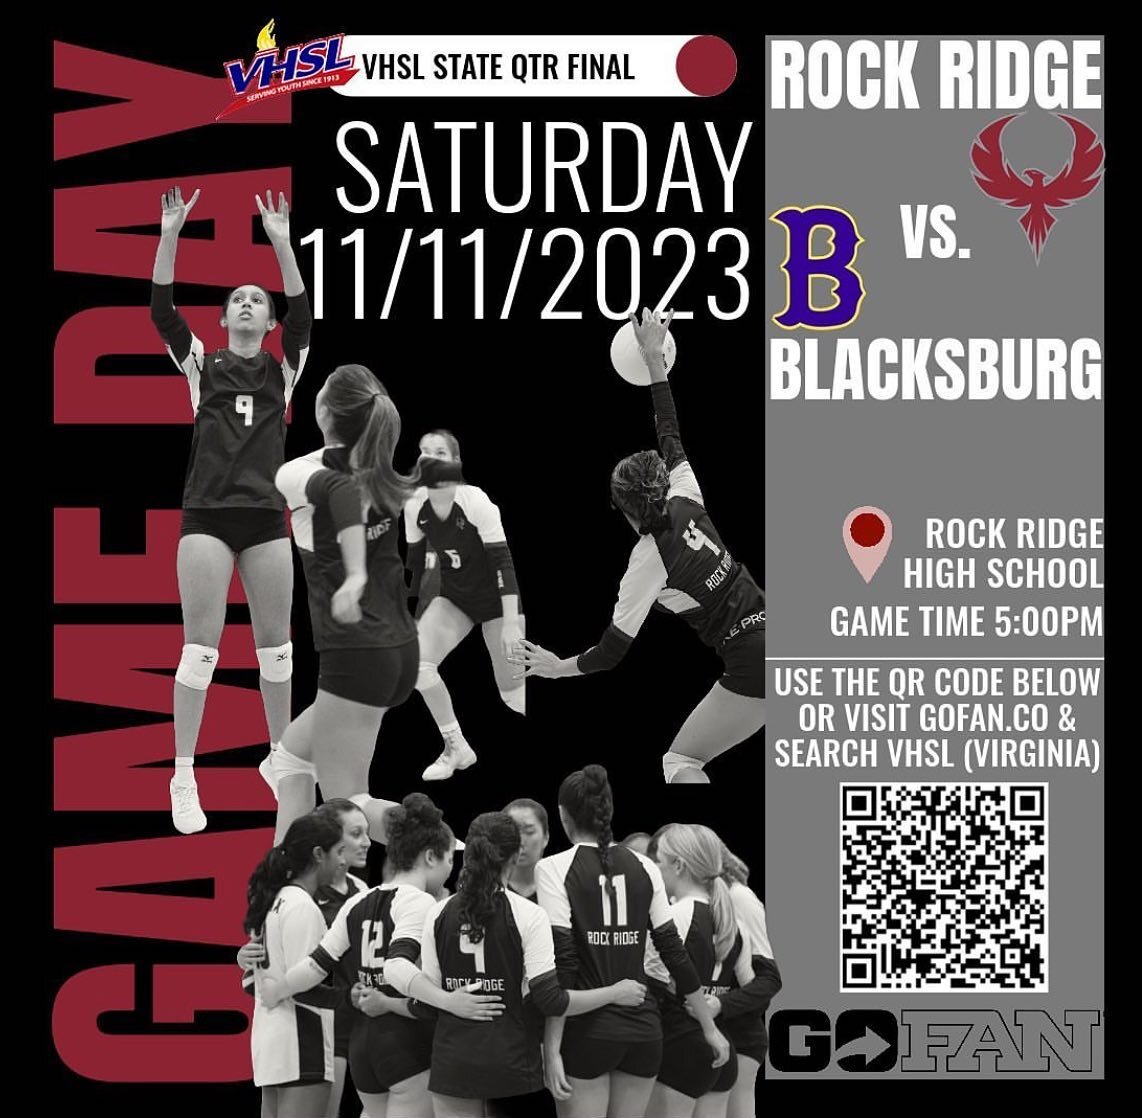 So excited for the @rockridgevolleyball team!  Looking forward to the game!